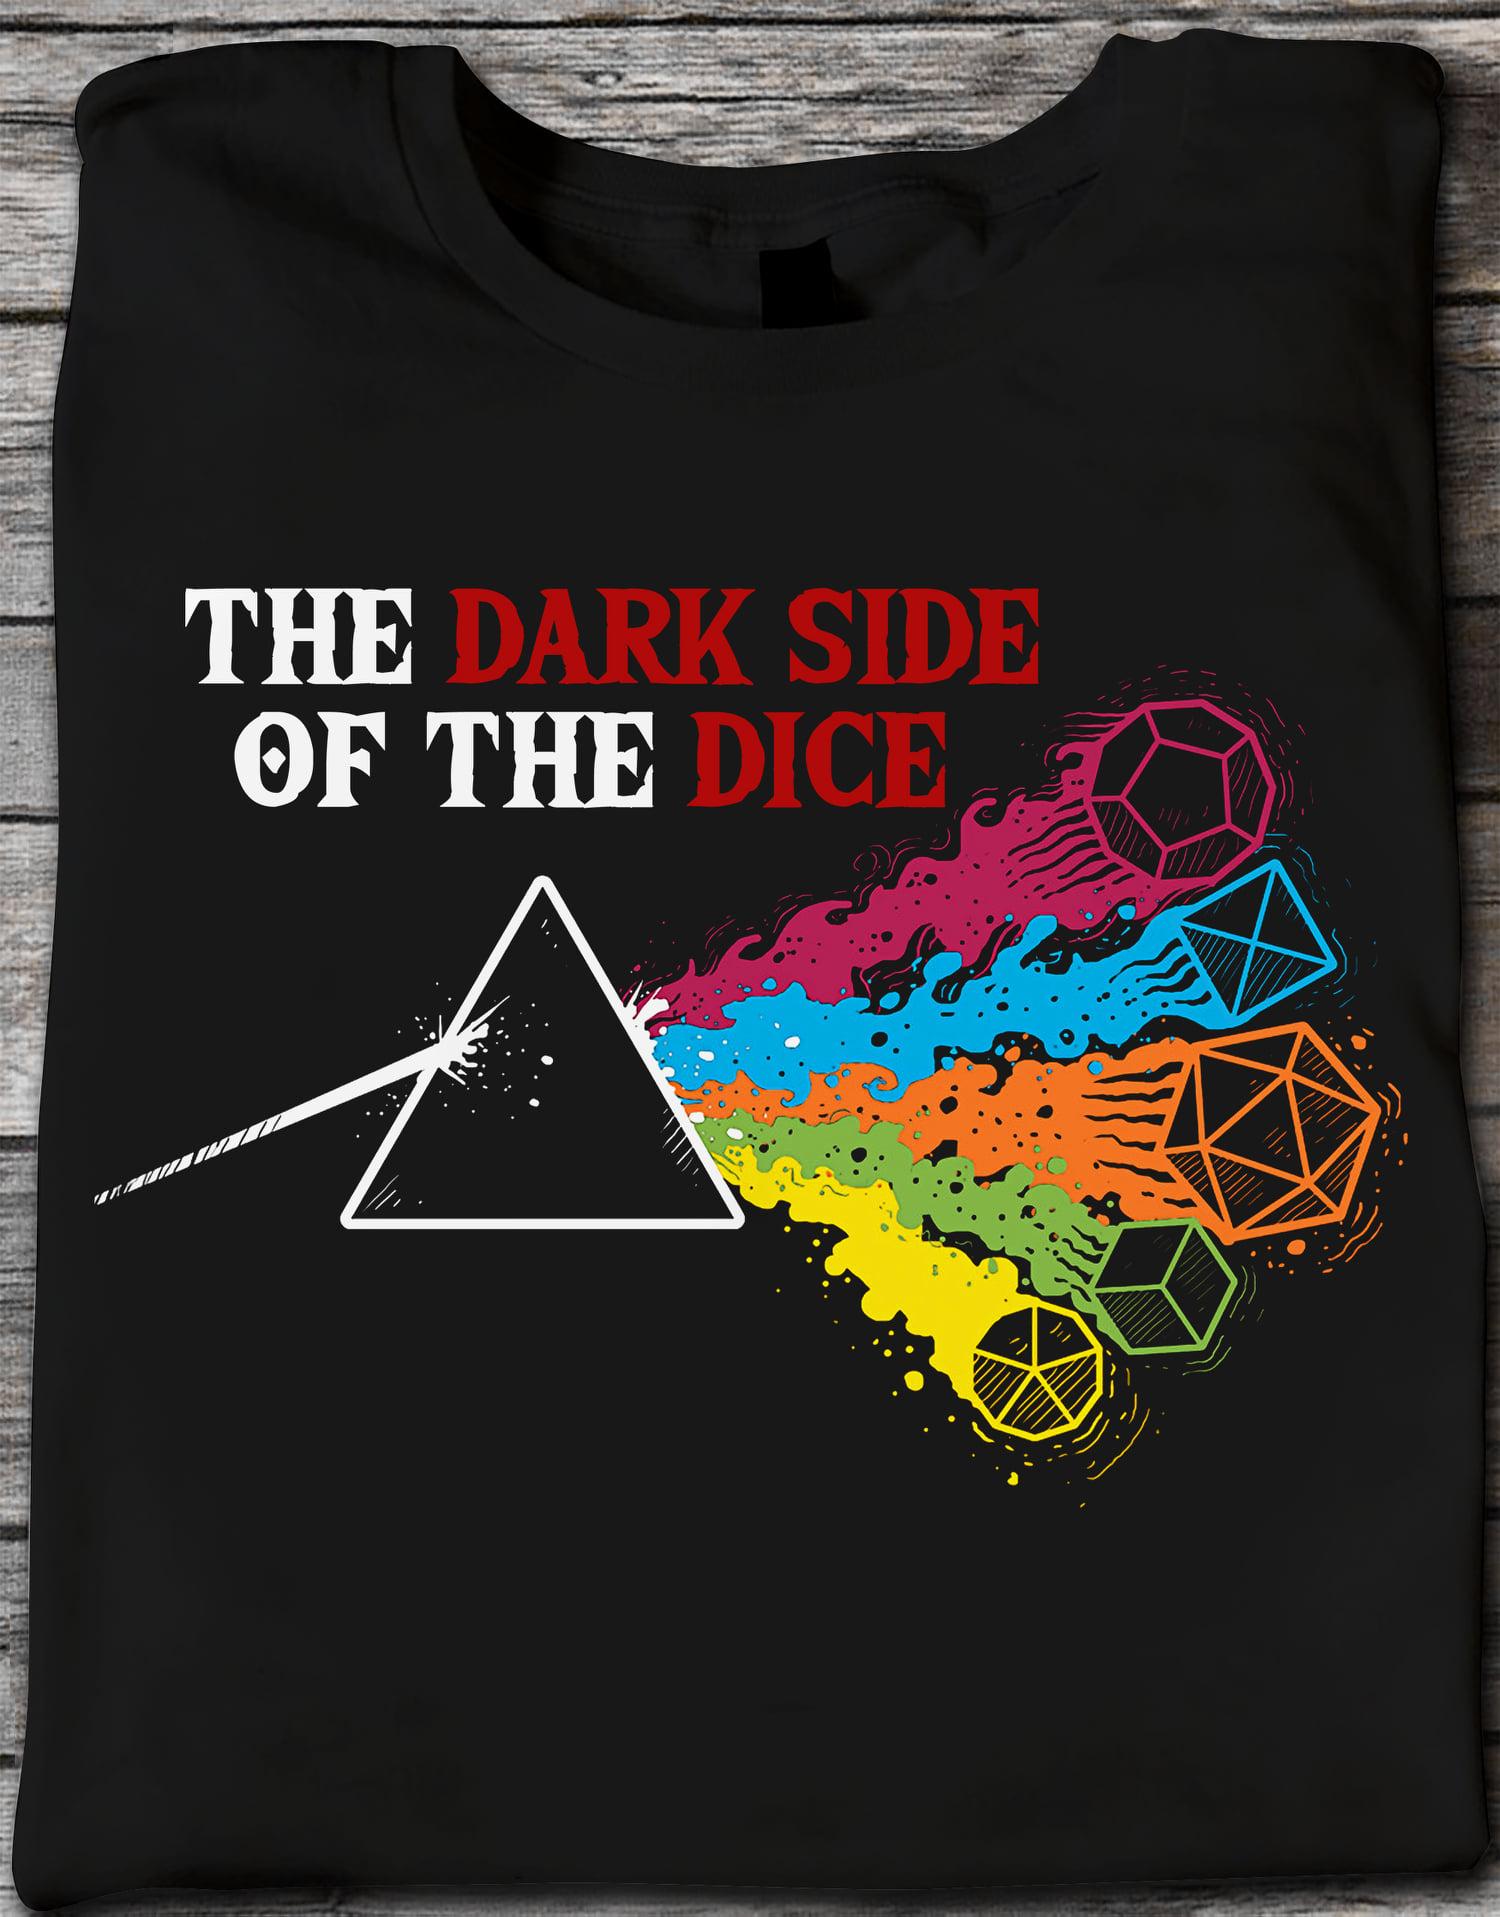 Dark Side Of The Moon Illustration, The Dice Dungeon And Dragon - The Dark Side Of The Dice